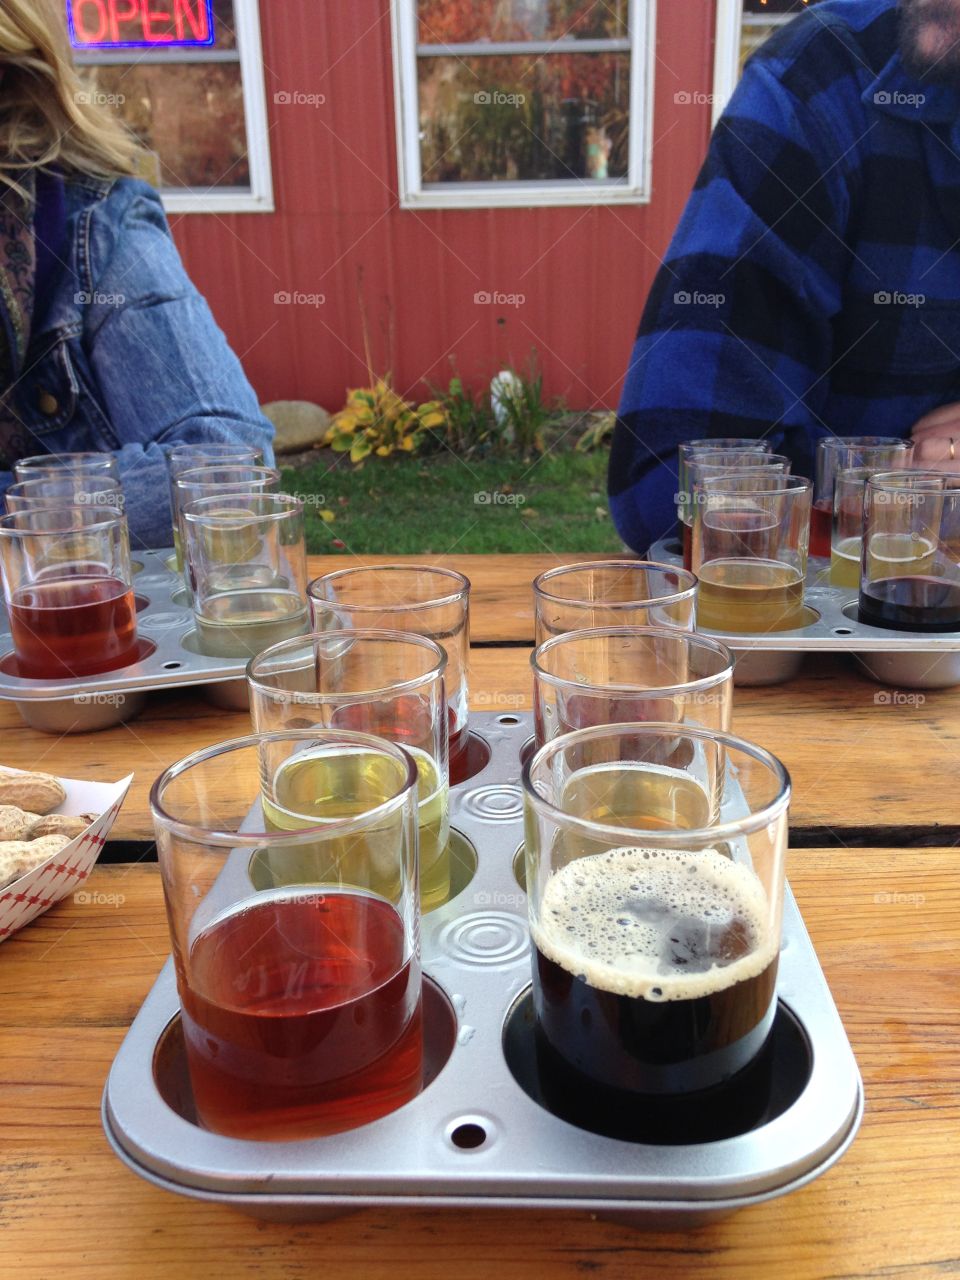 Fall means cider tasting and apple orchards!